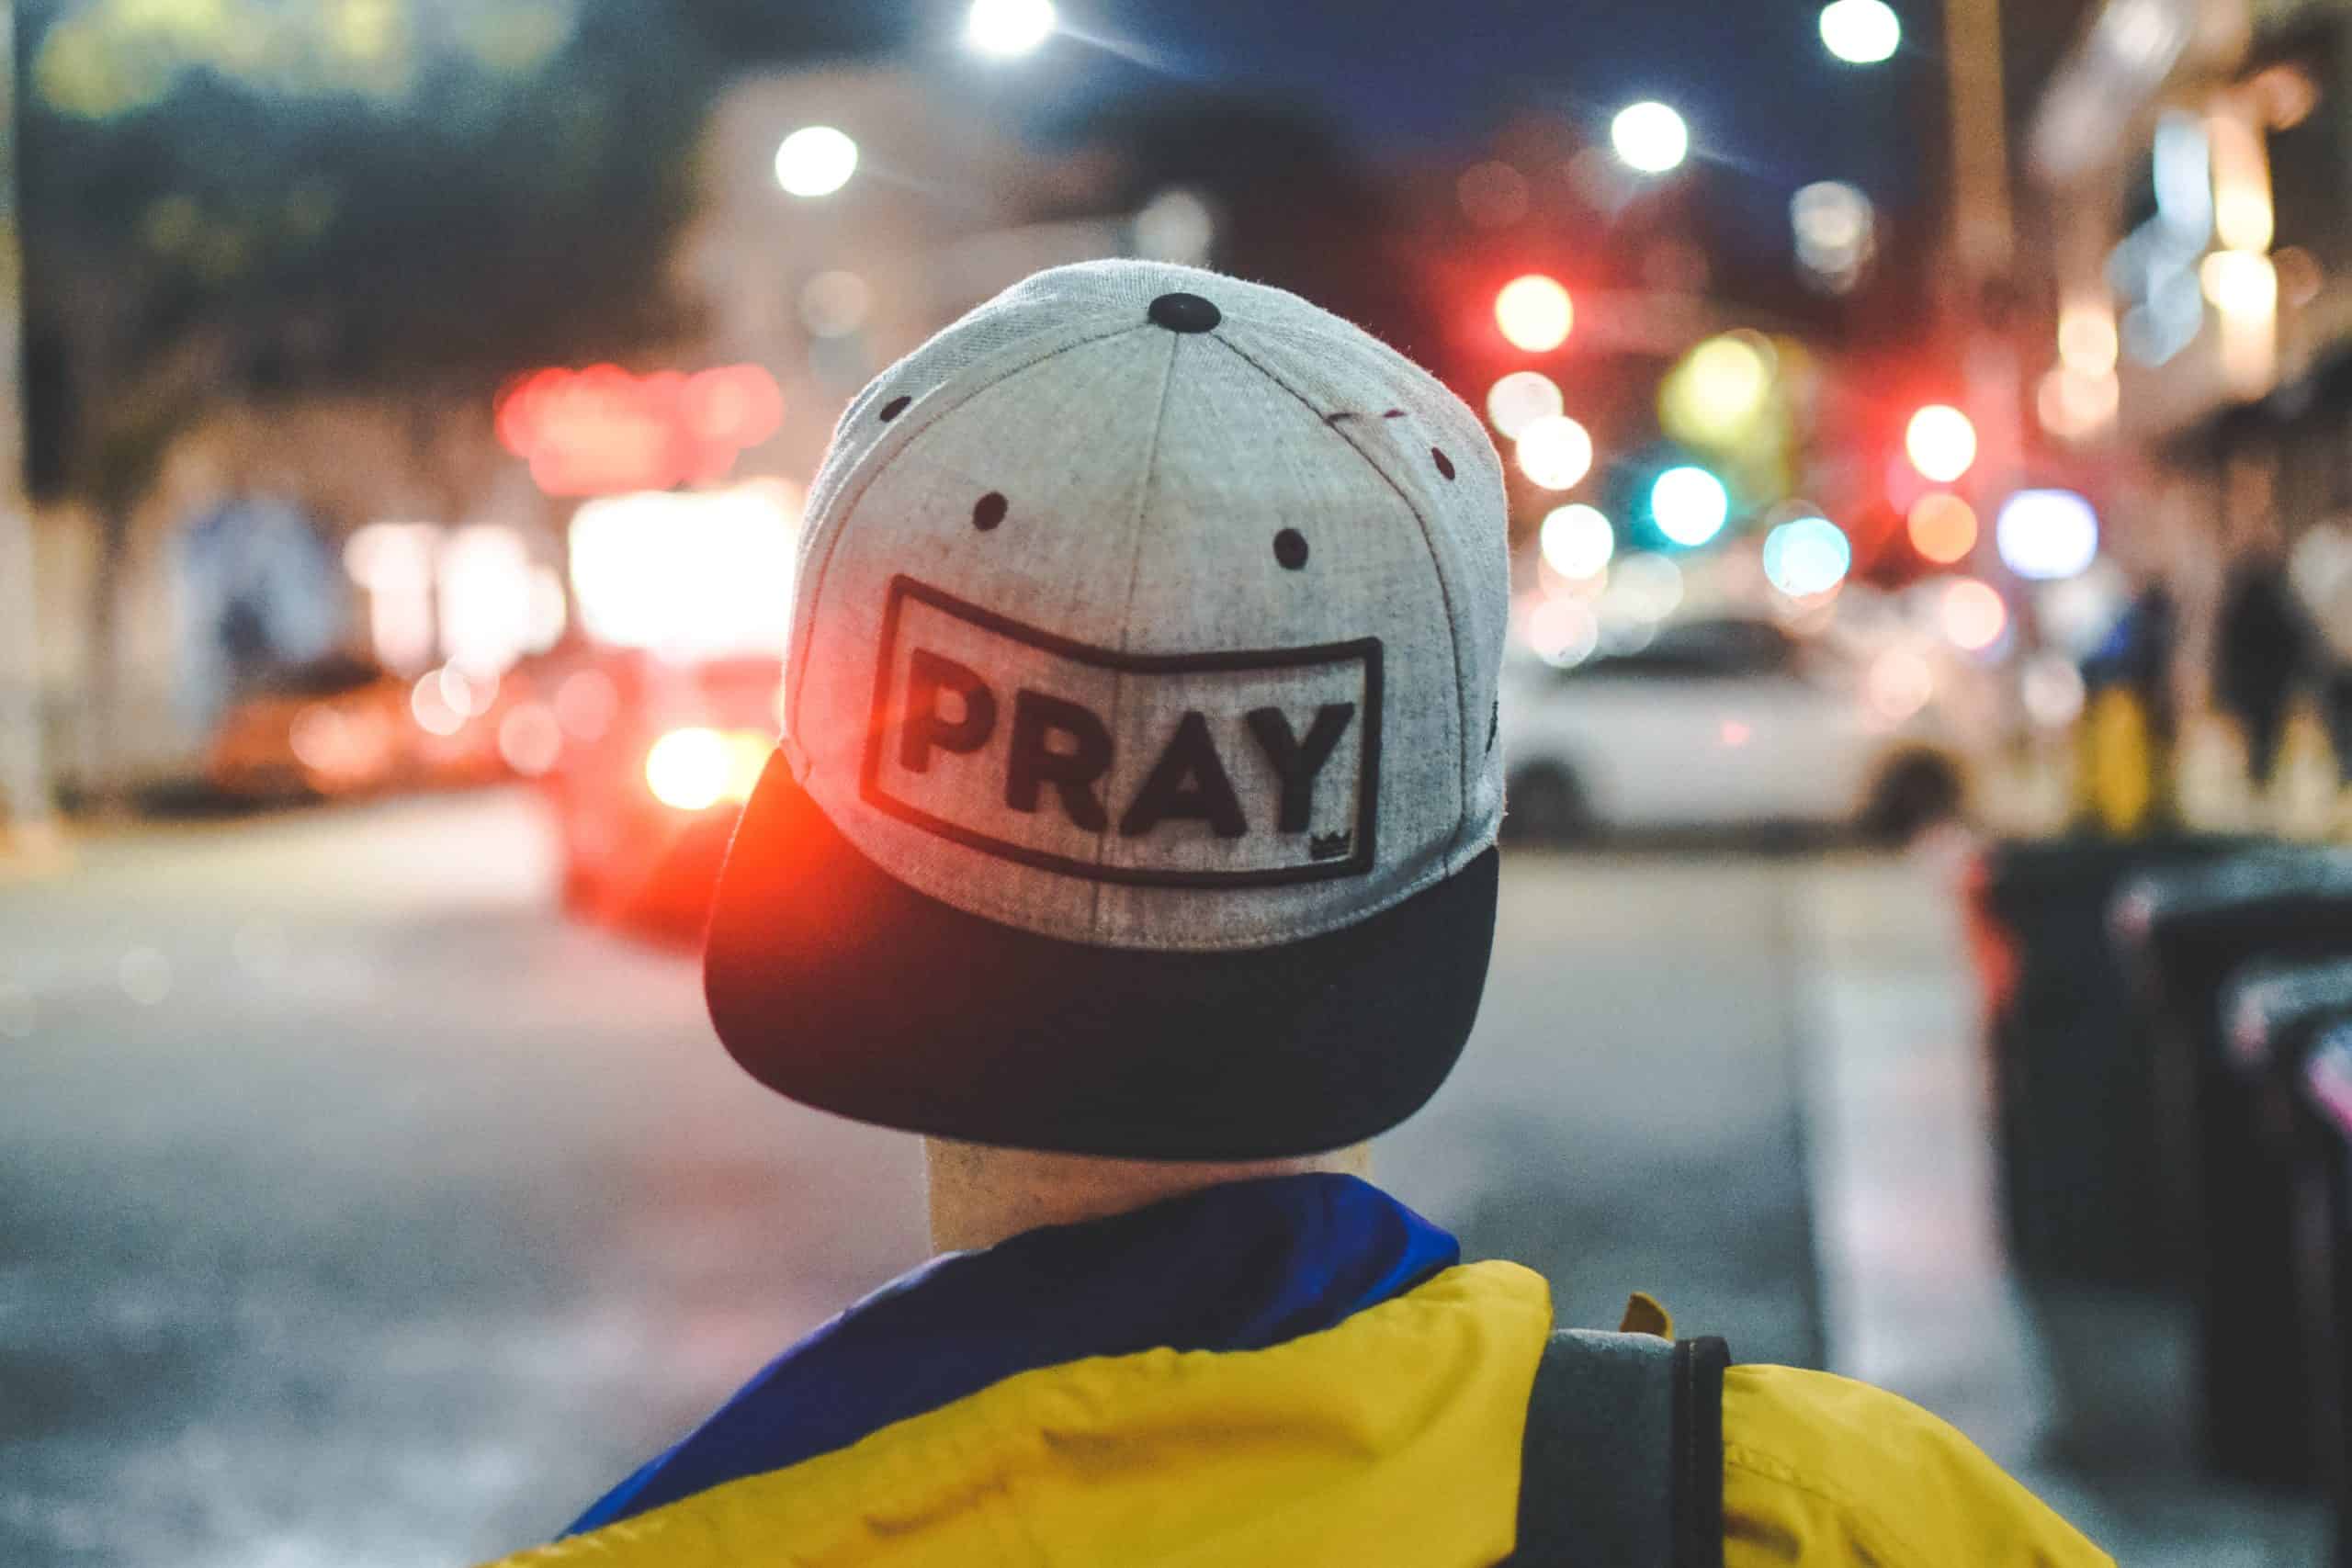 hat with the word "pray"